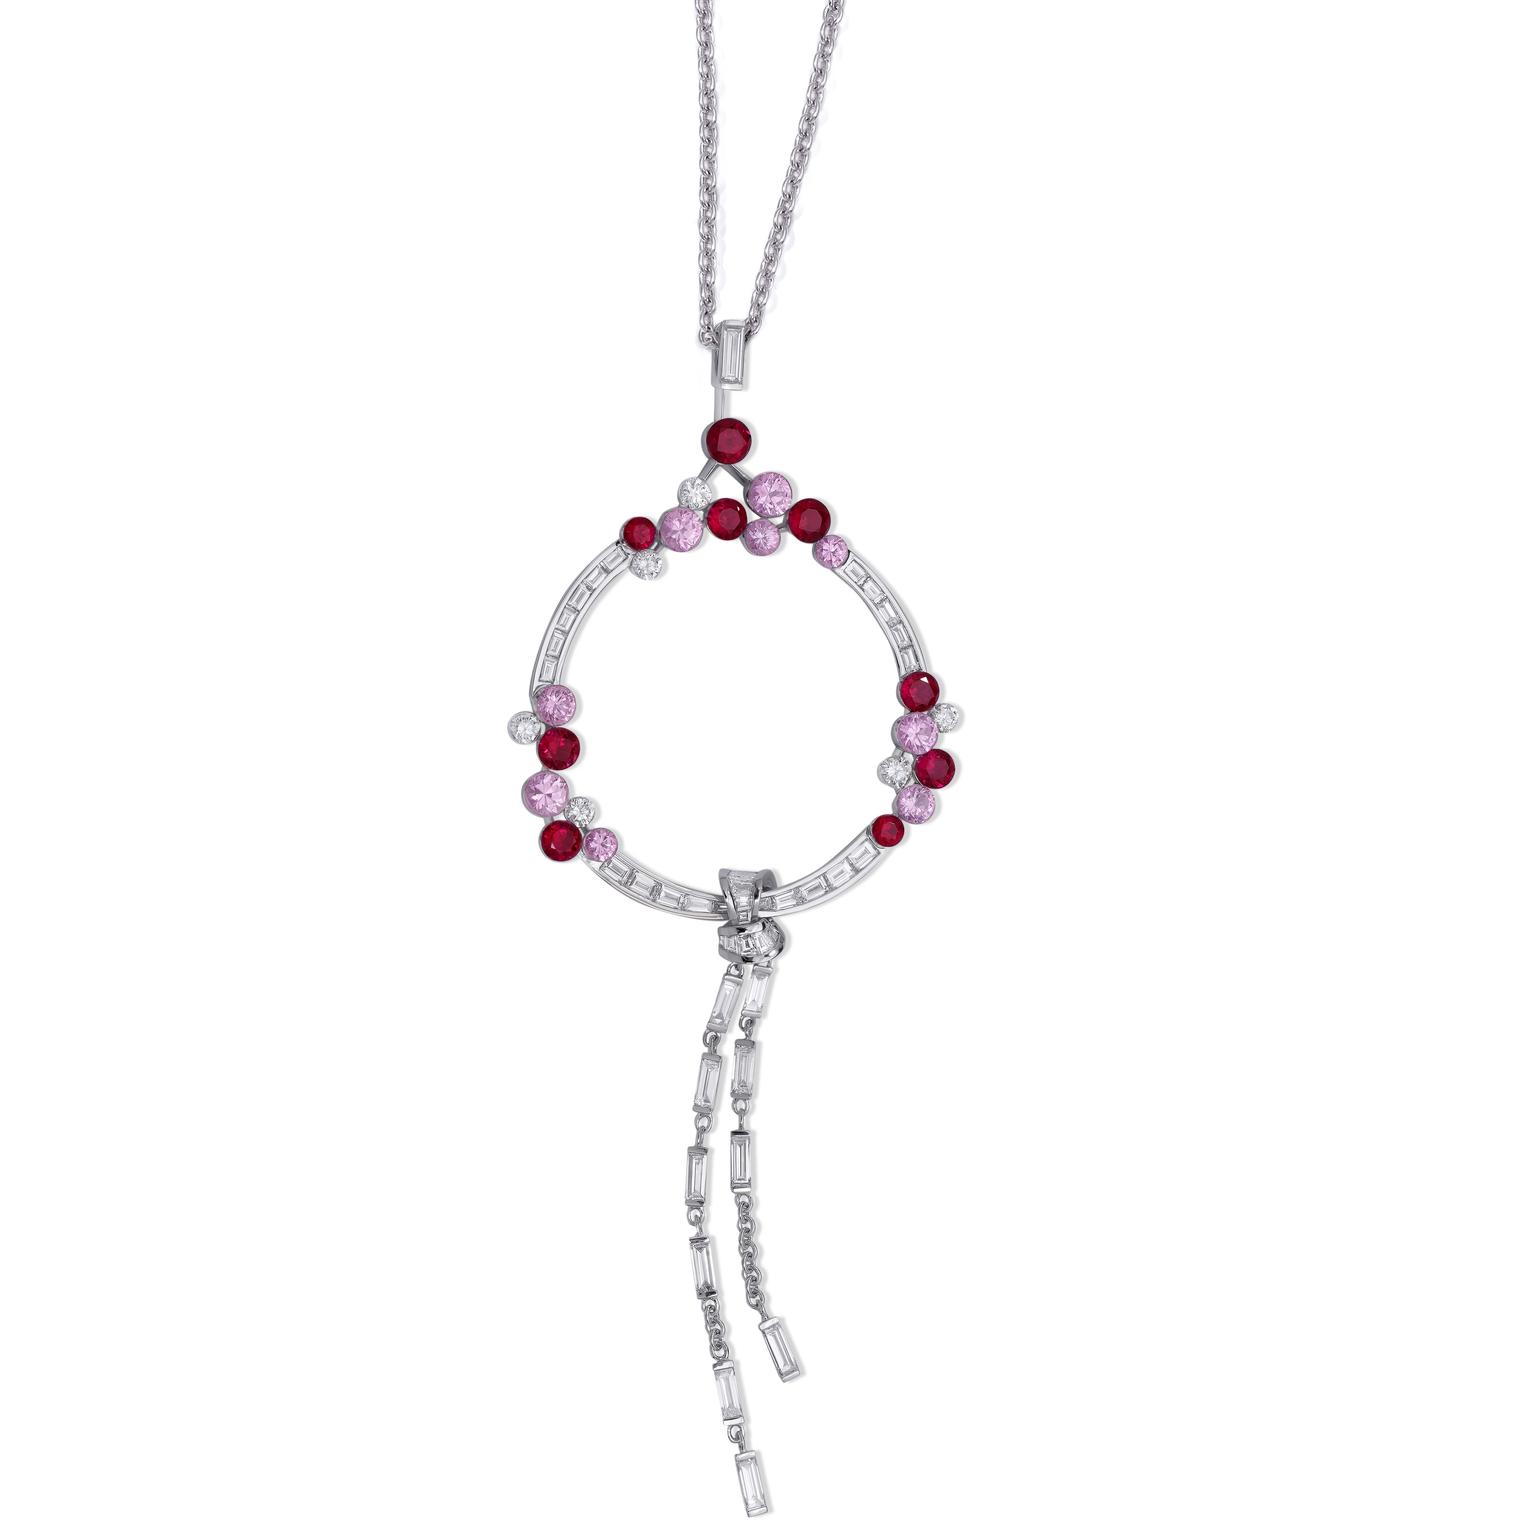 Stenzhorn Una diamond ruby and pink sapphire necklace